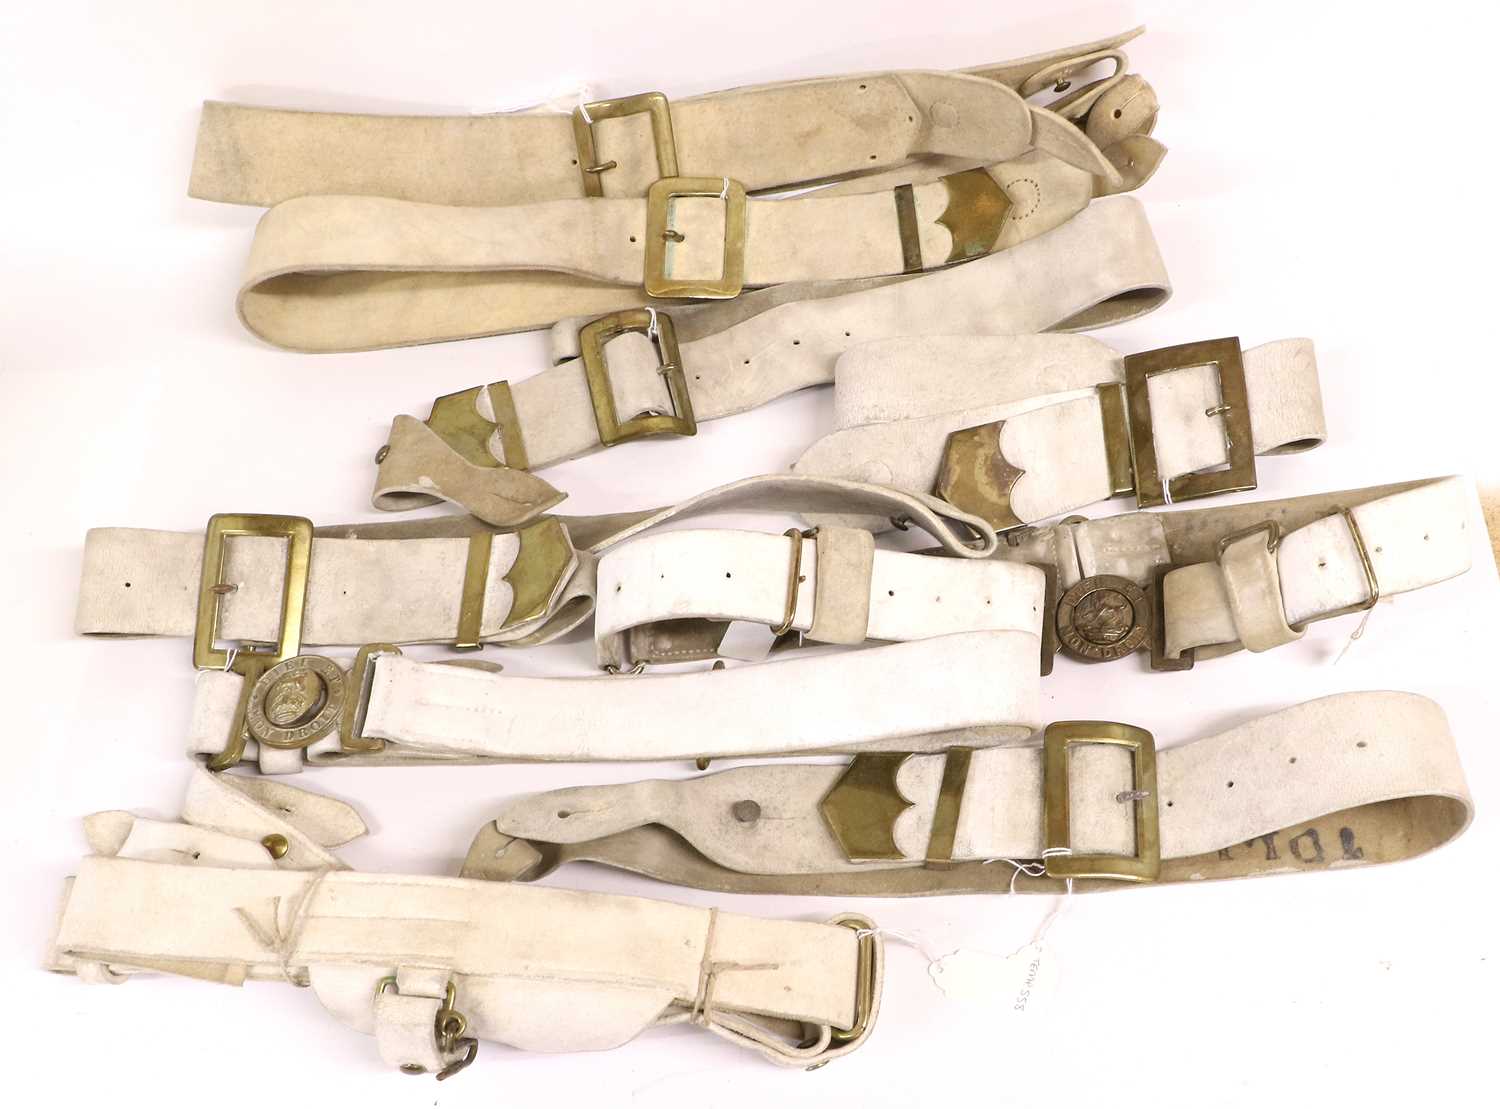 A Quantity of British Uniform Accessories, including Sam Browne belts, sword slings, leather straps, - Image 2 of 11